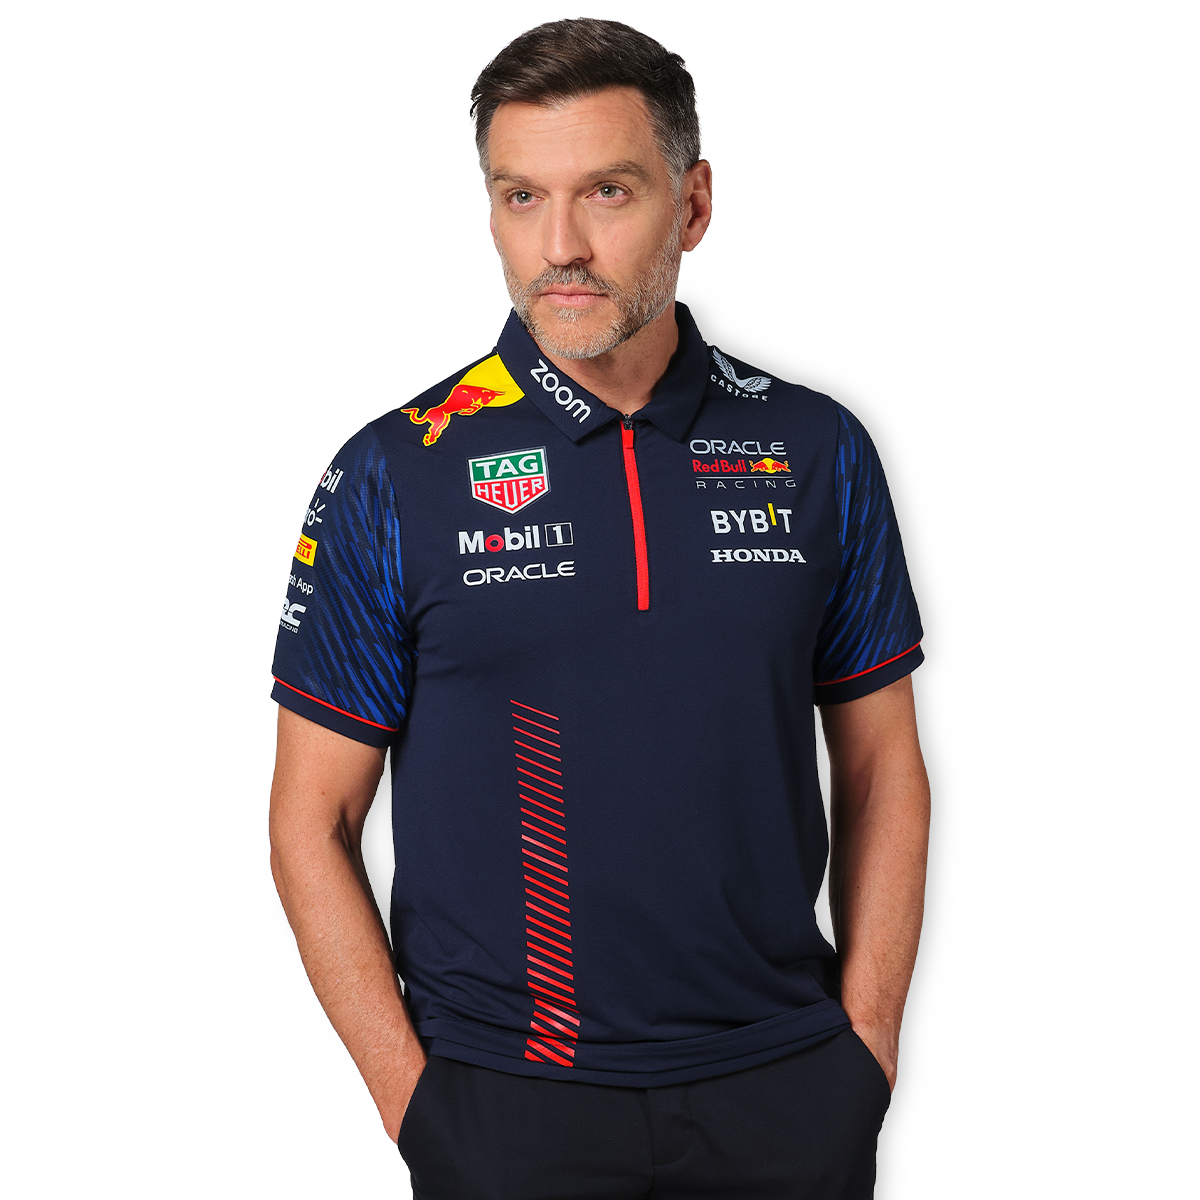 Red Bull F1 Gifts & Merchandise for Sale